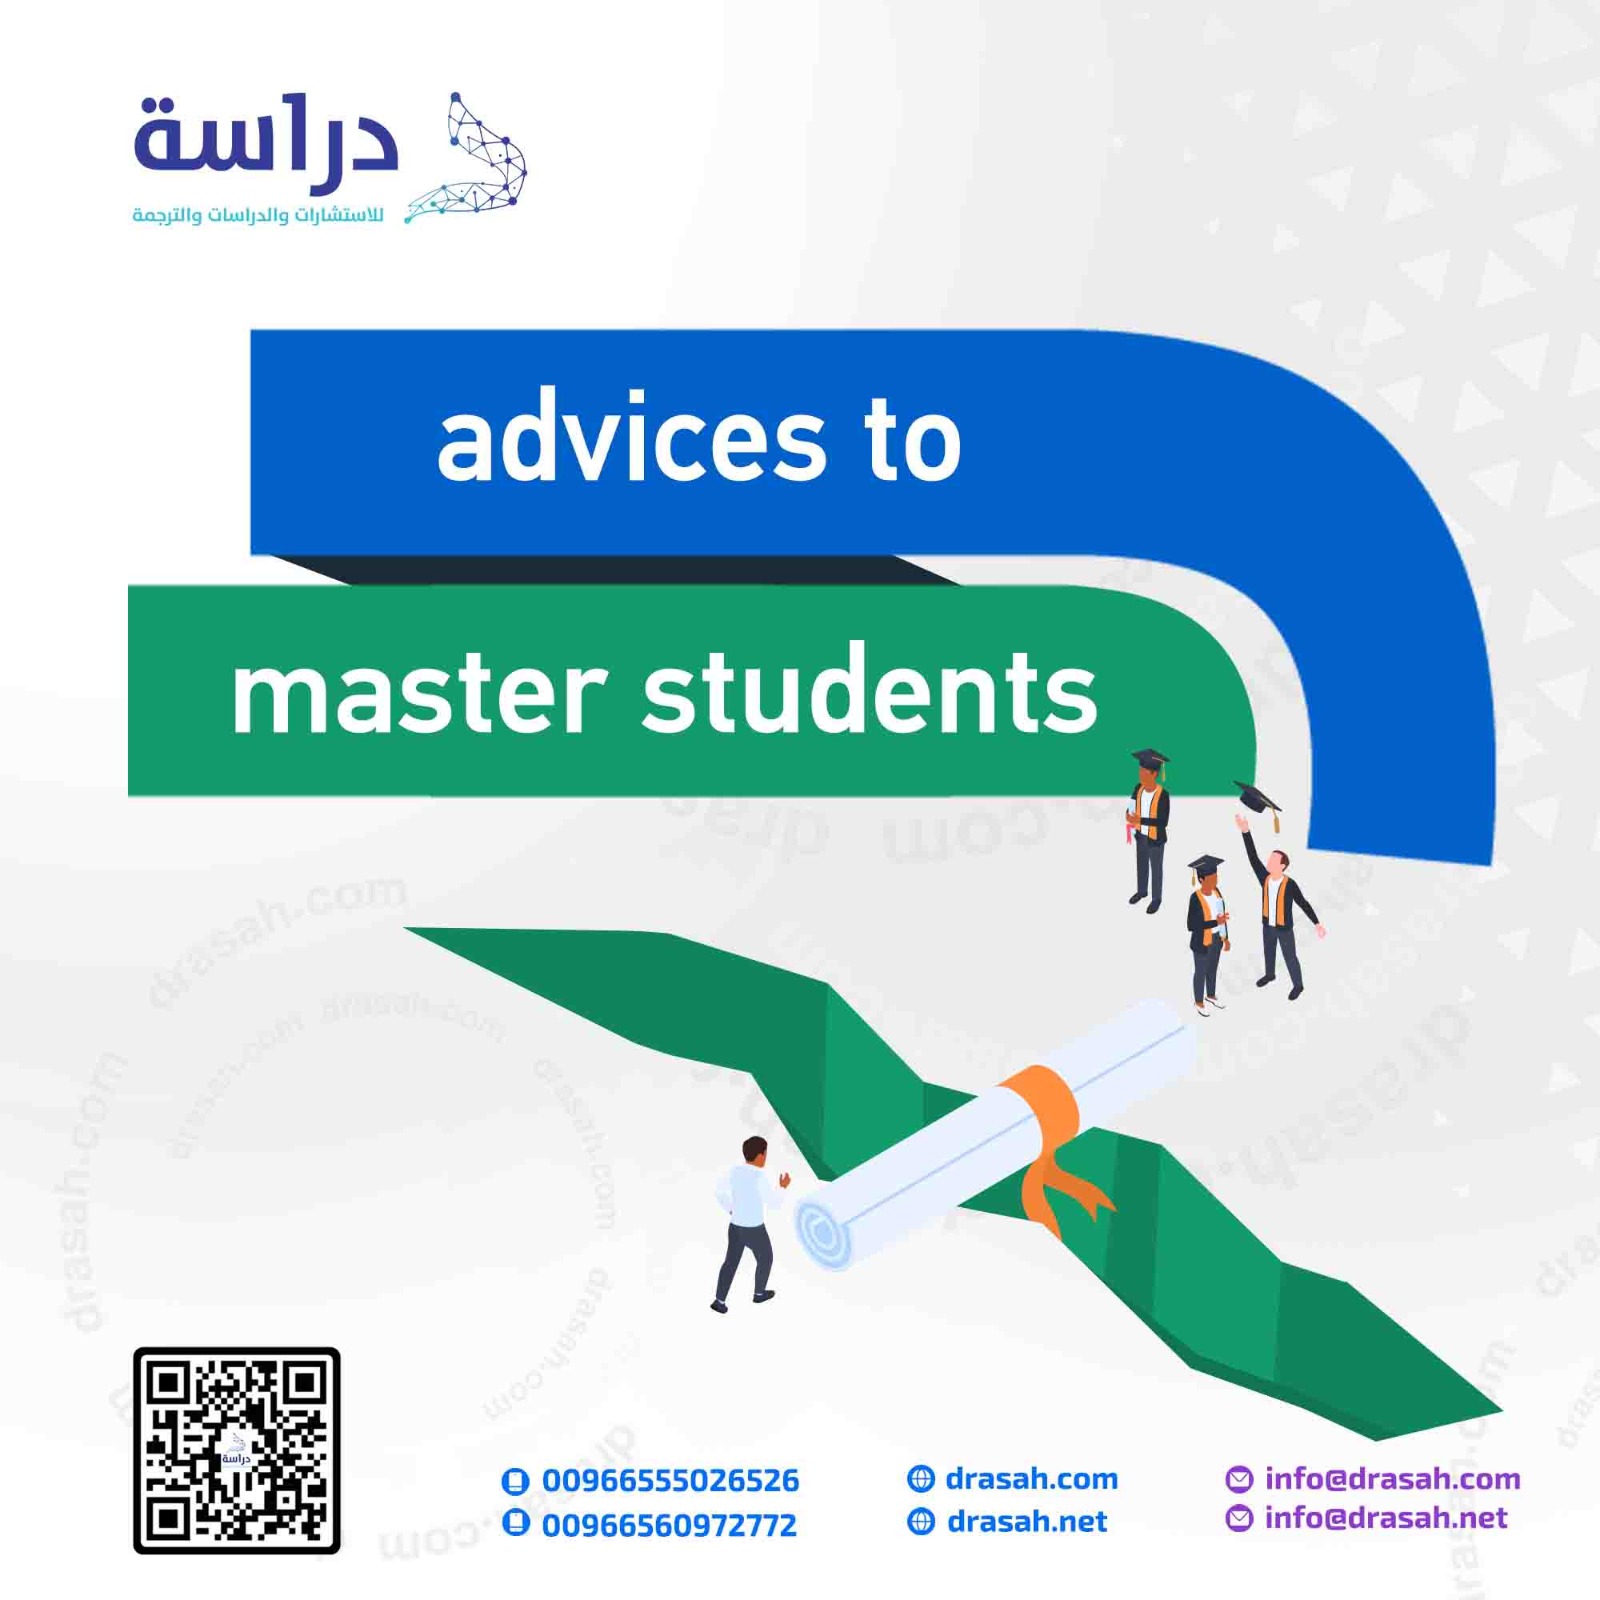 advices to master students